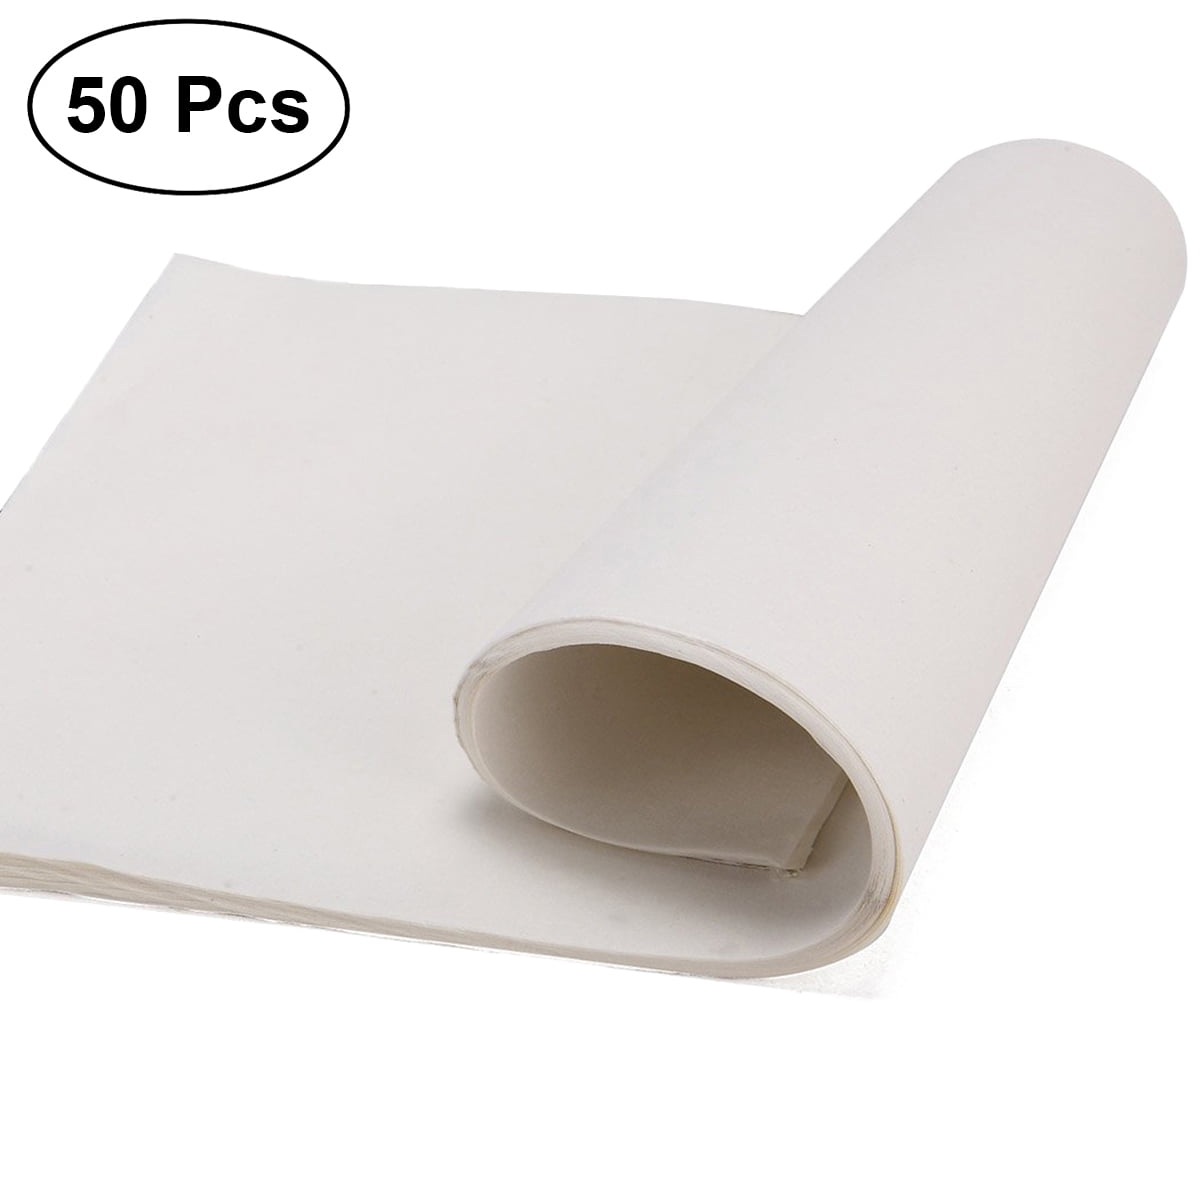 48 Sheets 9 x 12 for Chinese Painting Sumi Pad Rice Paper